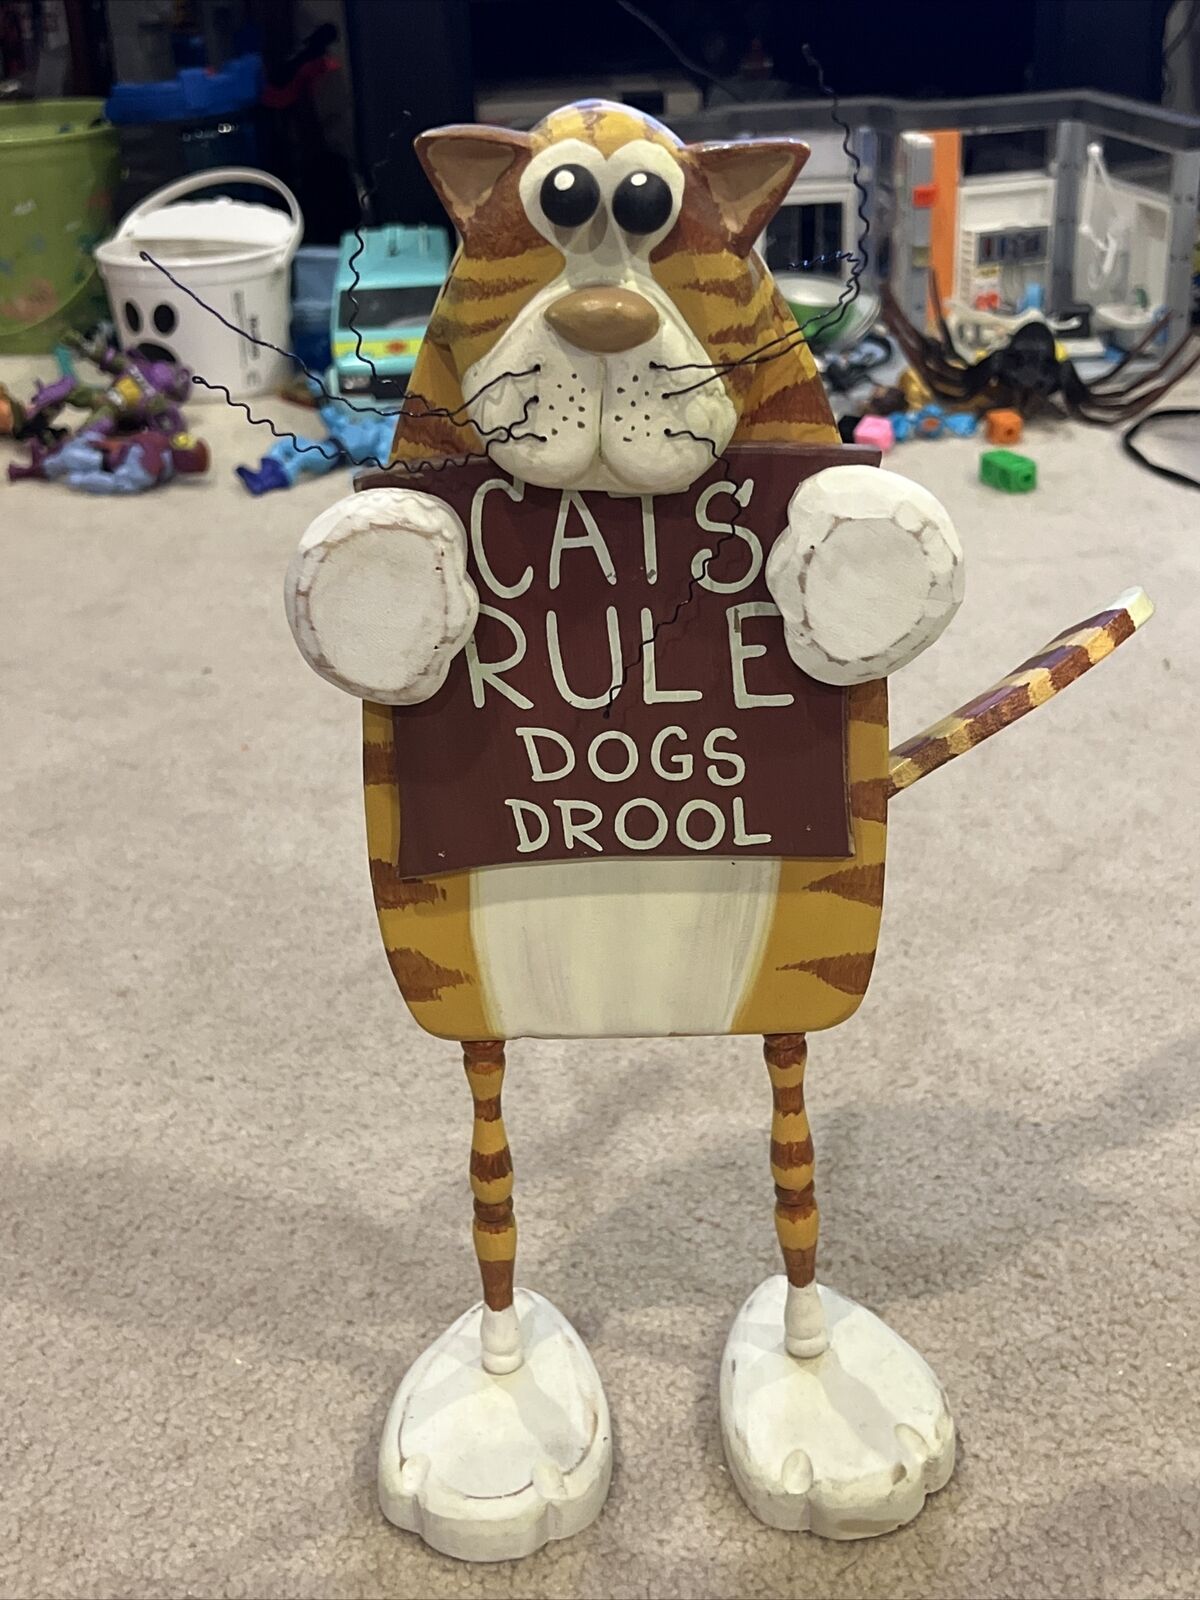 Cats Rule Dogs Drool Americana Wooden Statue Figure Standing Display